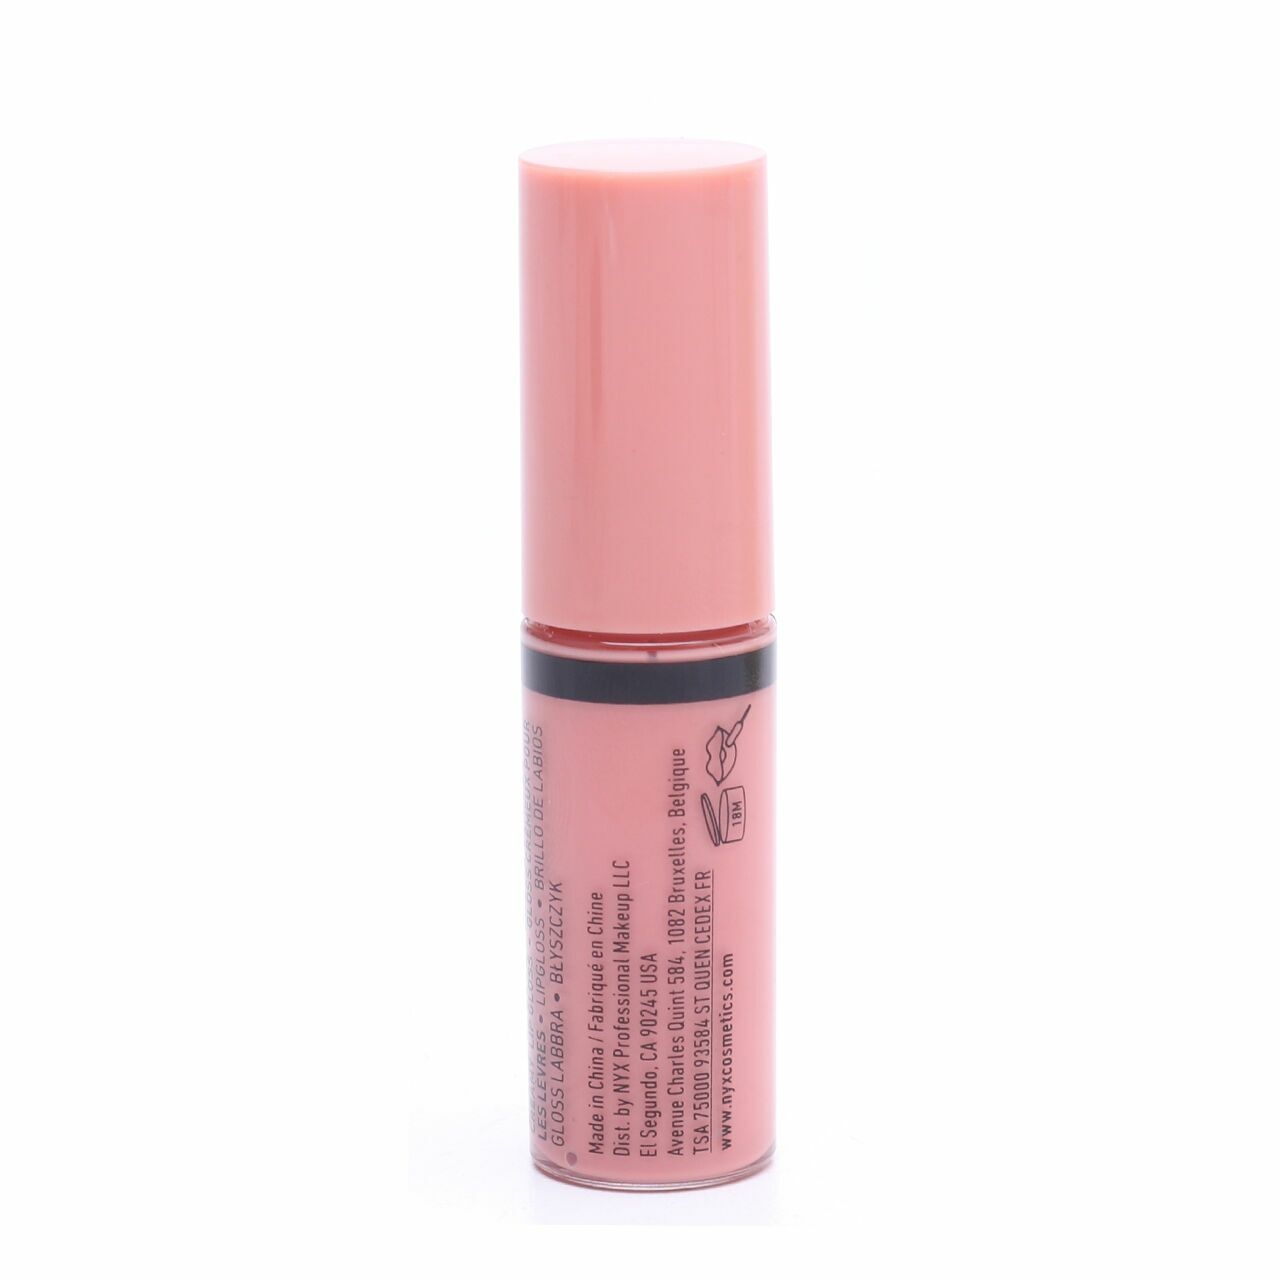 NYX Creme Brulee Butter Gloss Lips